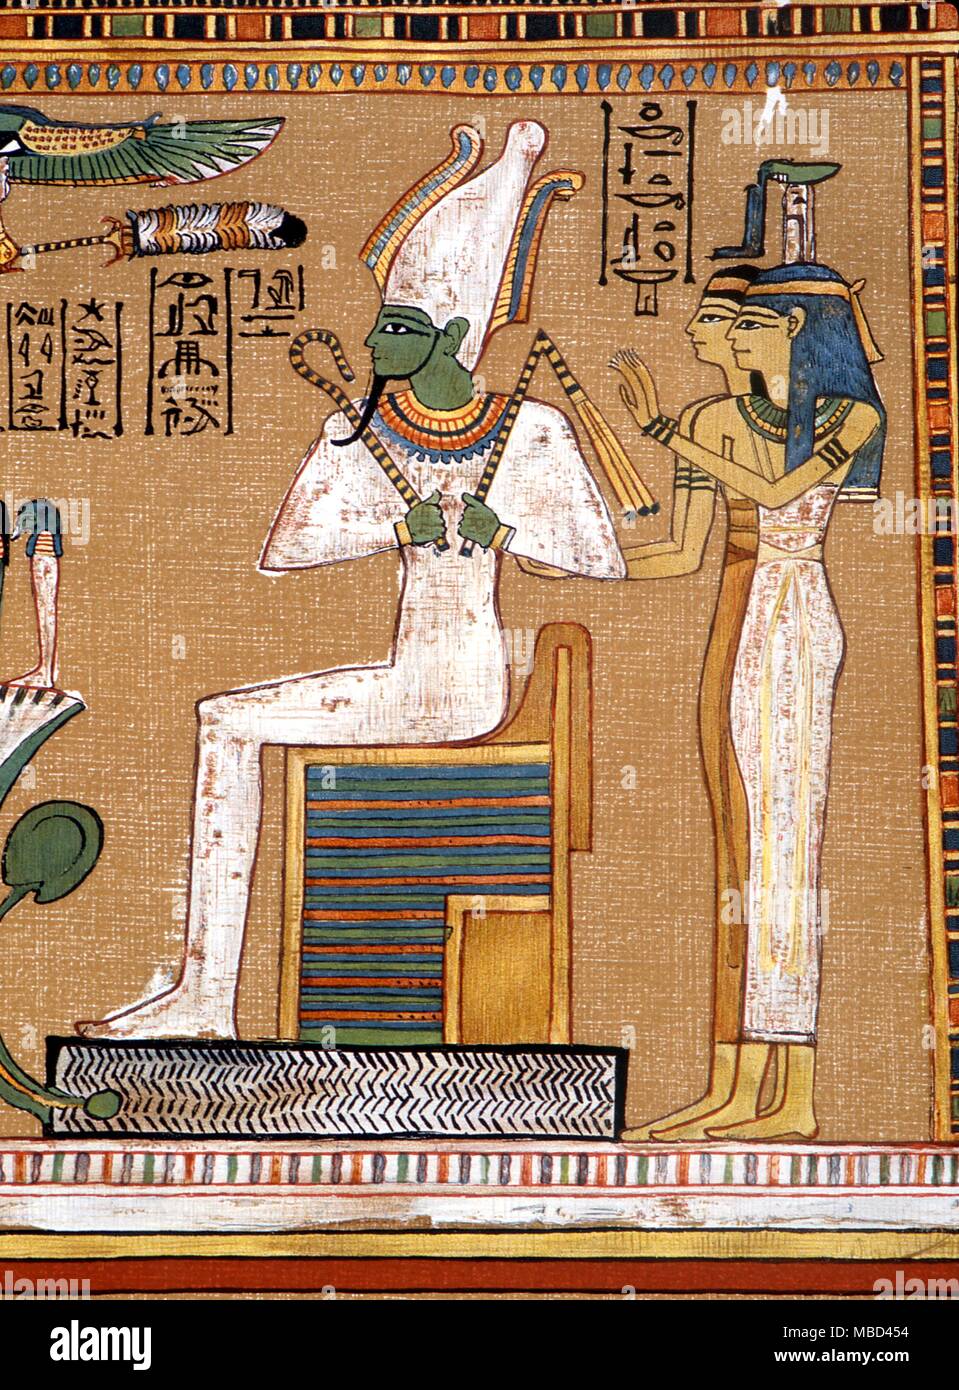 Mythology - Egyptian - Osiris - the god Osiris enthroned within a shrine, with the wife-sister, Isis, and her sister Nephthys behind. Also the four gods of the cardinal points. From the Egyptian Book of the Dead. - ©Charles Walker / Stock Photo